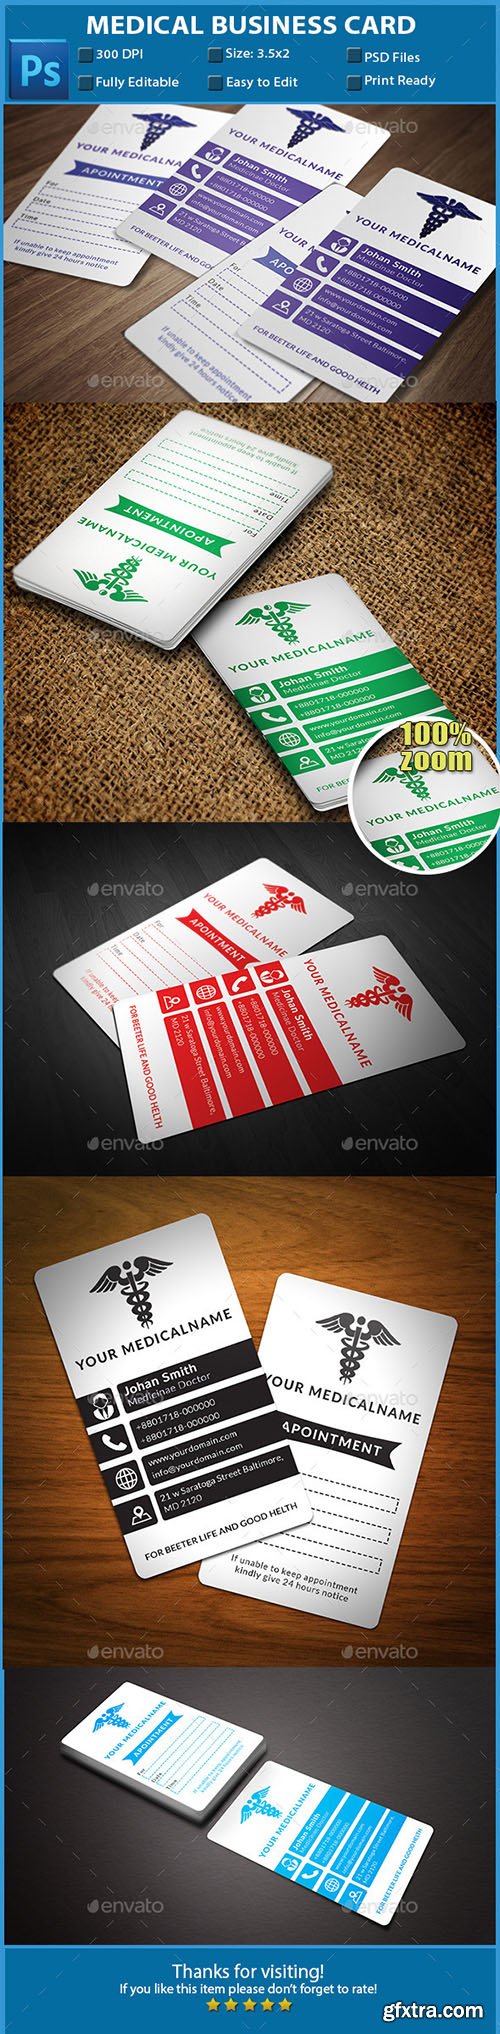 GraphicRiver Medical Business Card